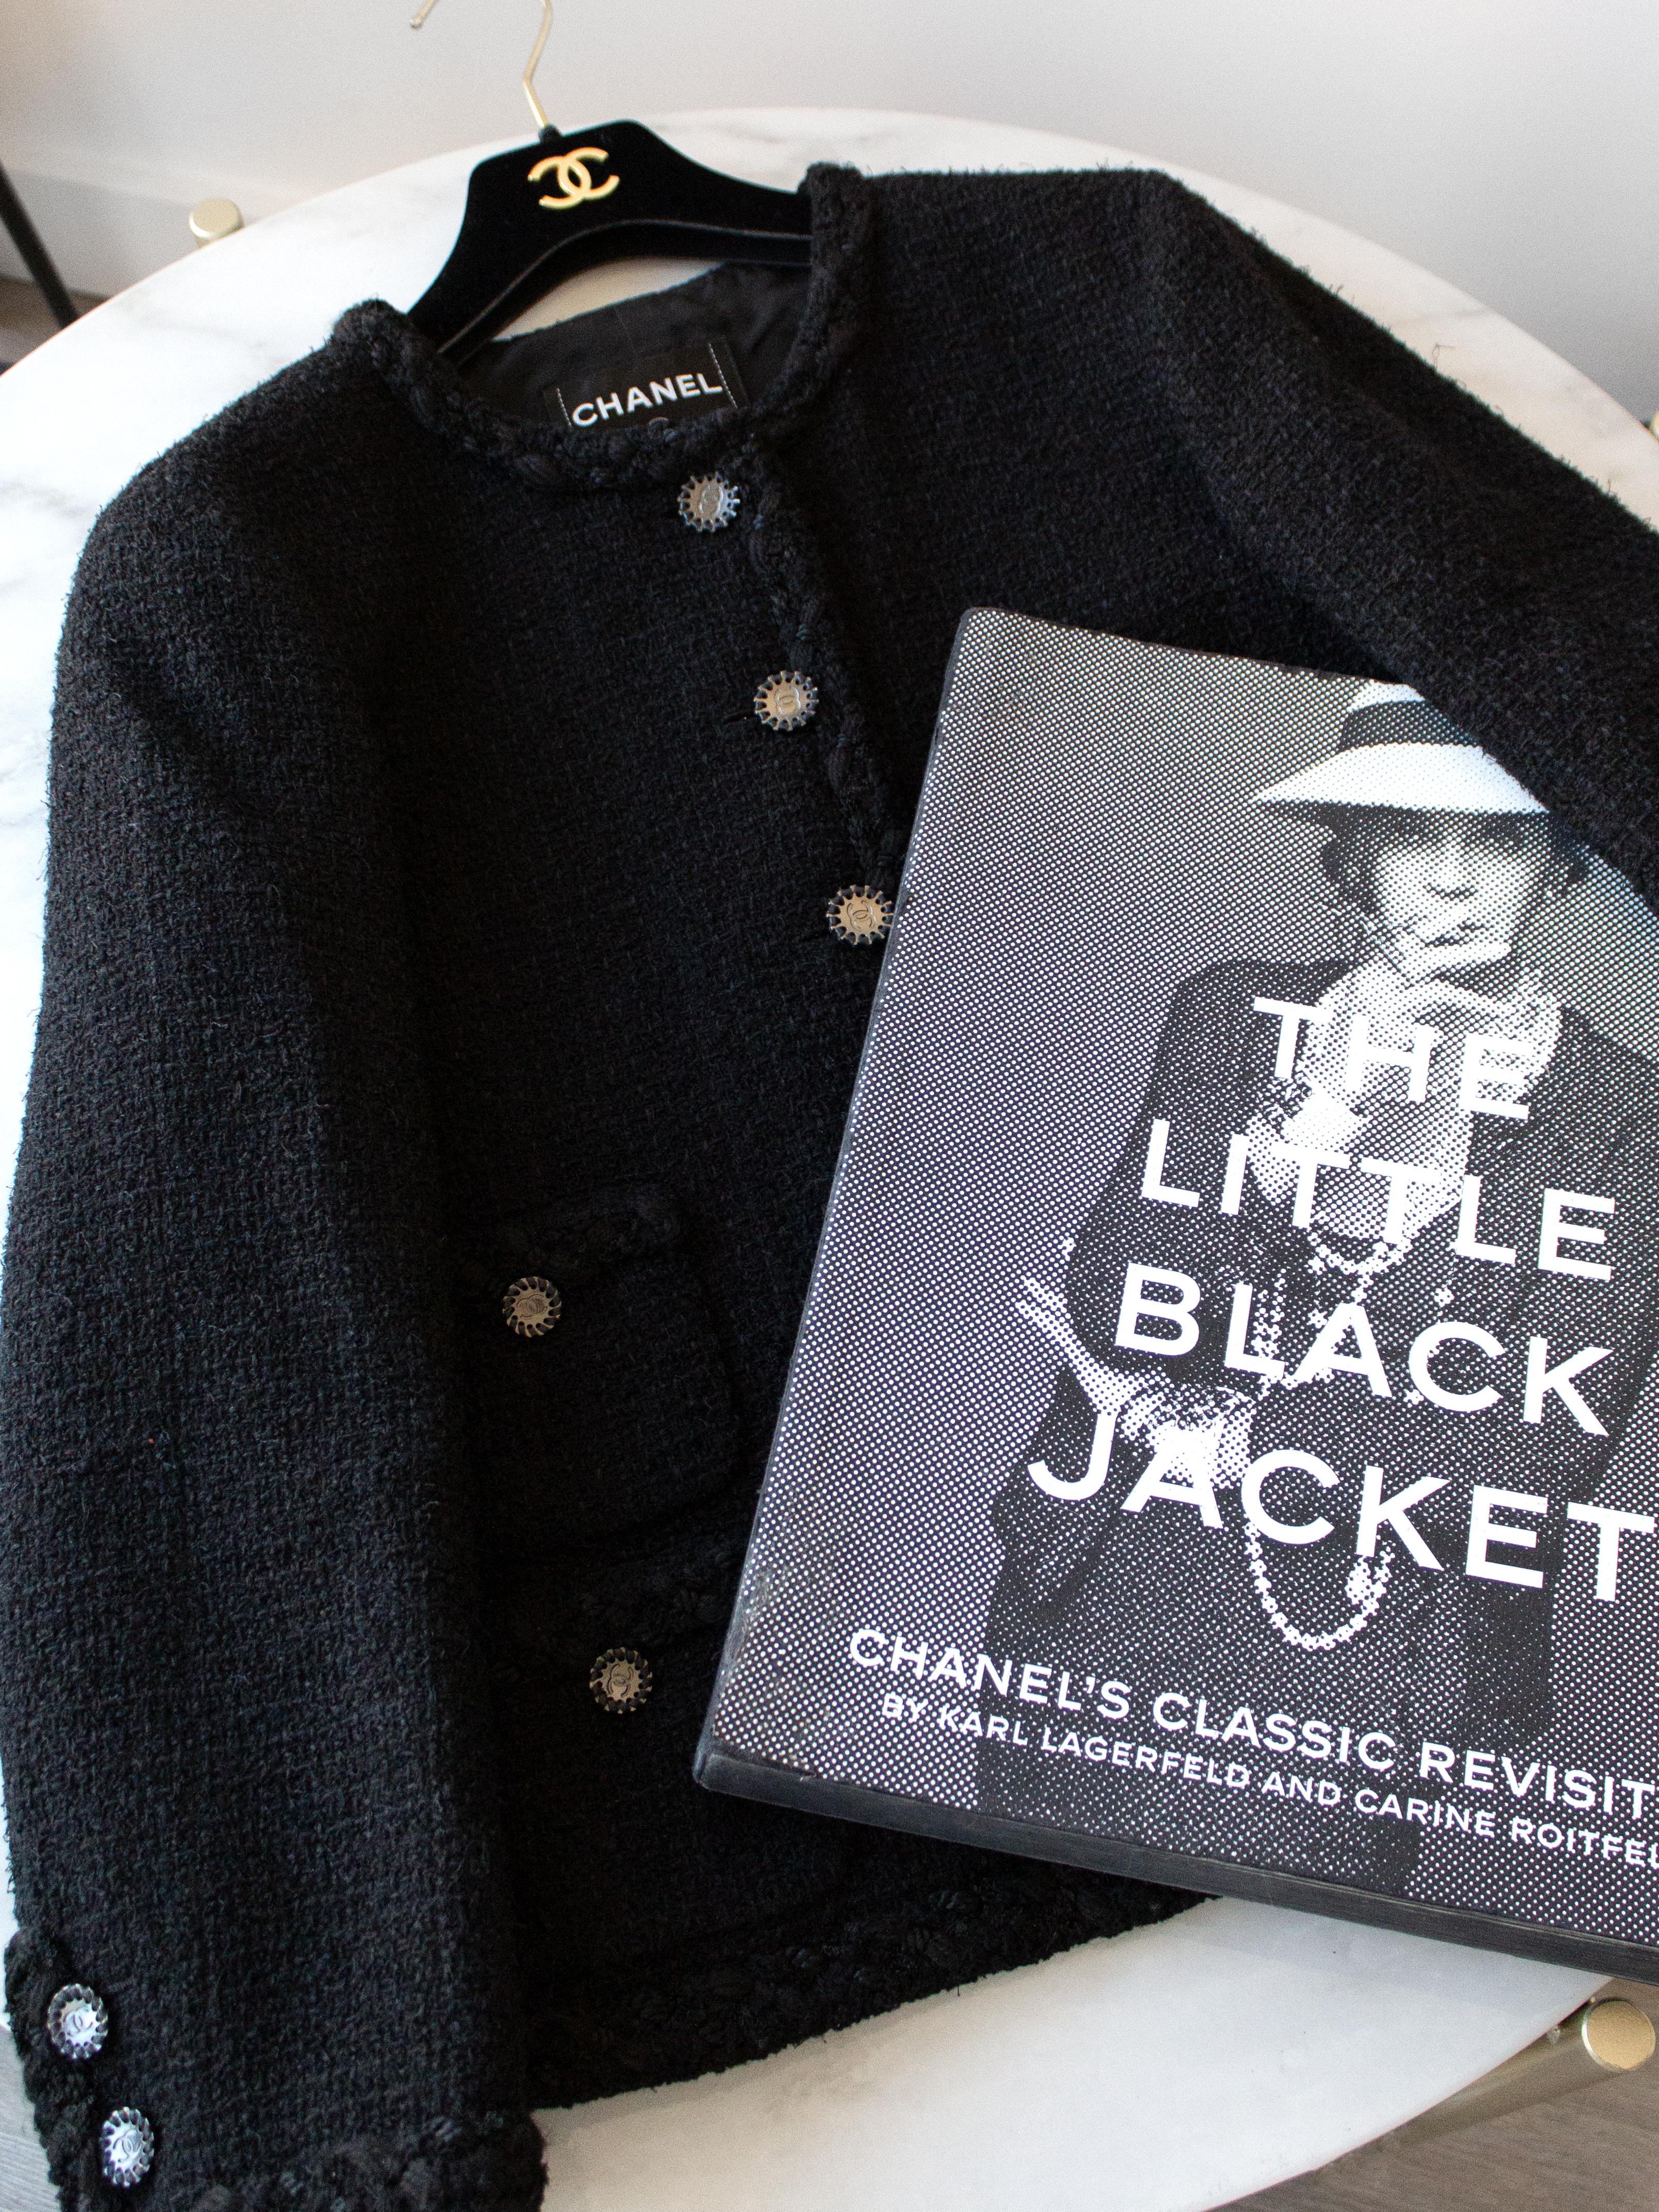 The most famous and iconic Little Black Jacket from Chanel Cruise 2011 collection. Rare to find, collectible heritage piece. The central feature of 'The Little Black Jacket' book and worldwide exhibition by Carine Roitfeld & Karl Lagerfeld. It was